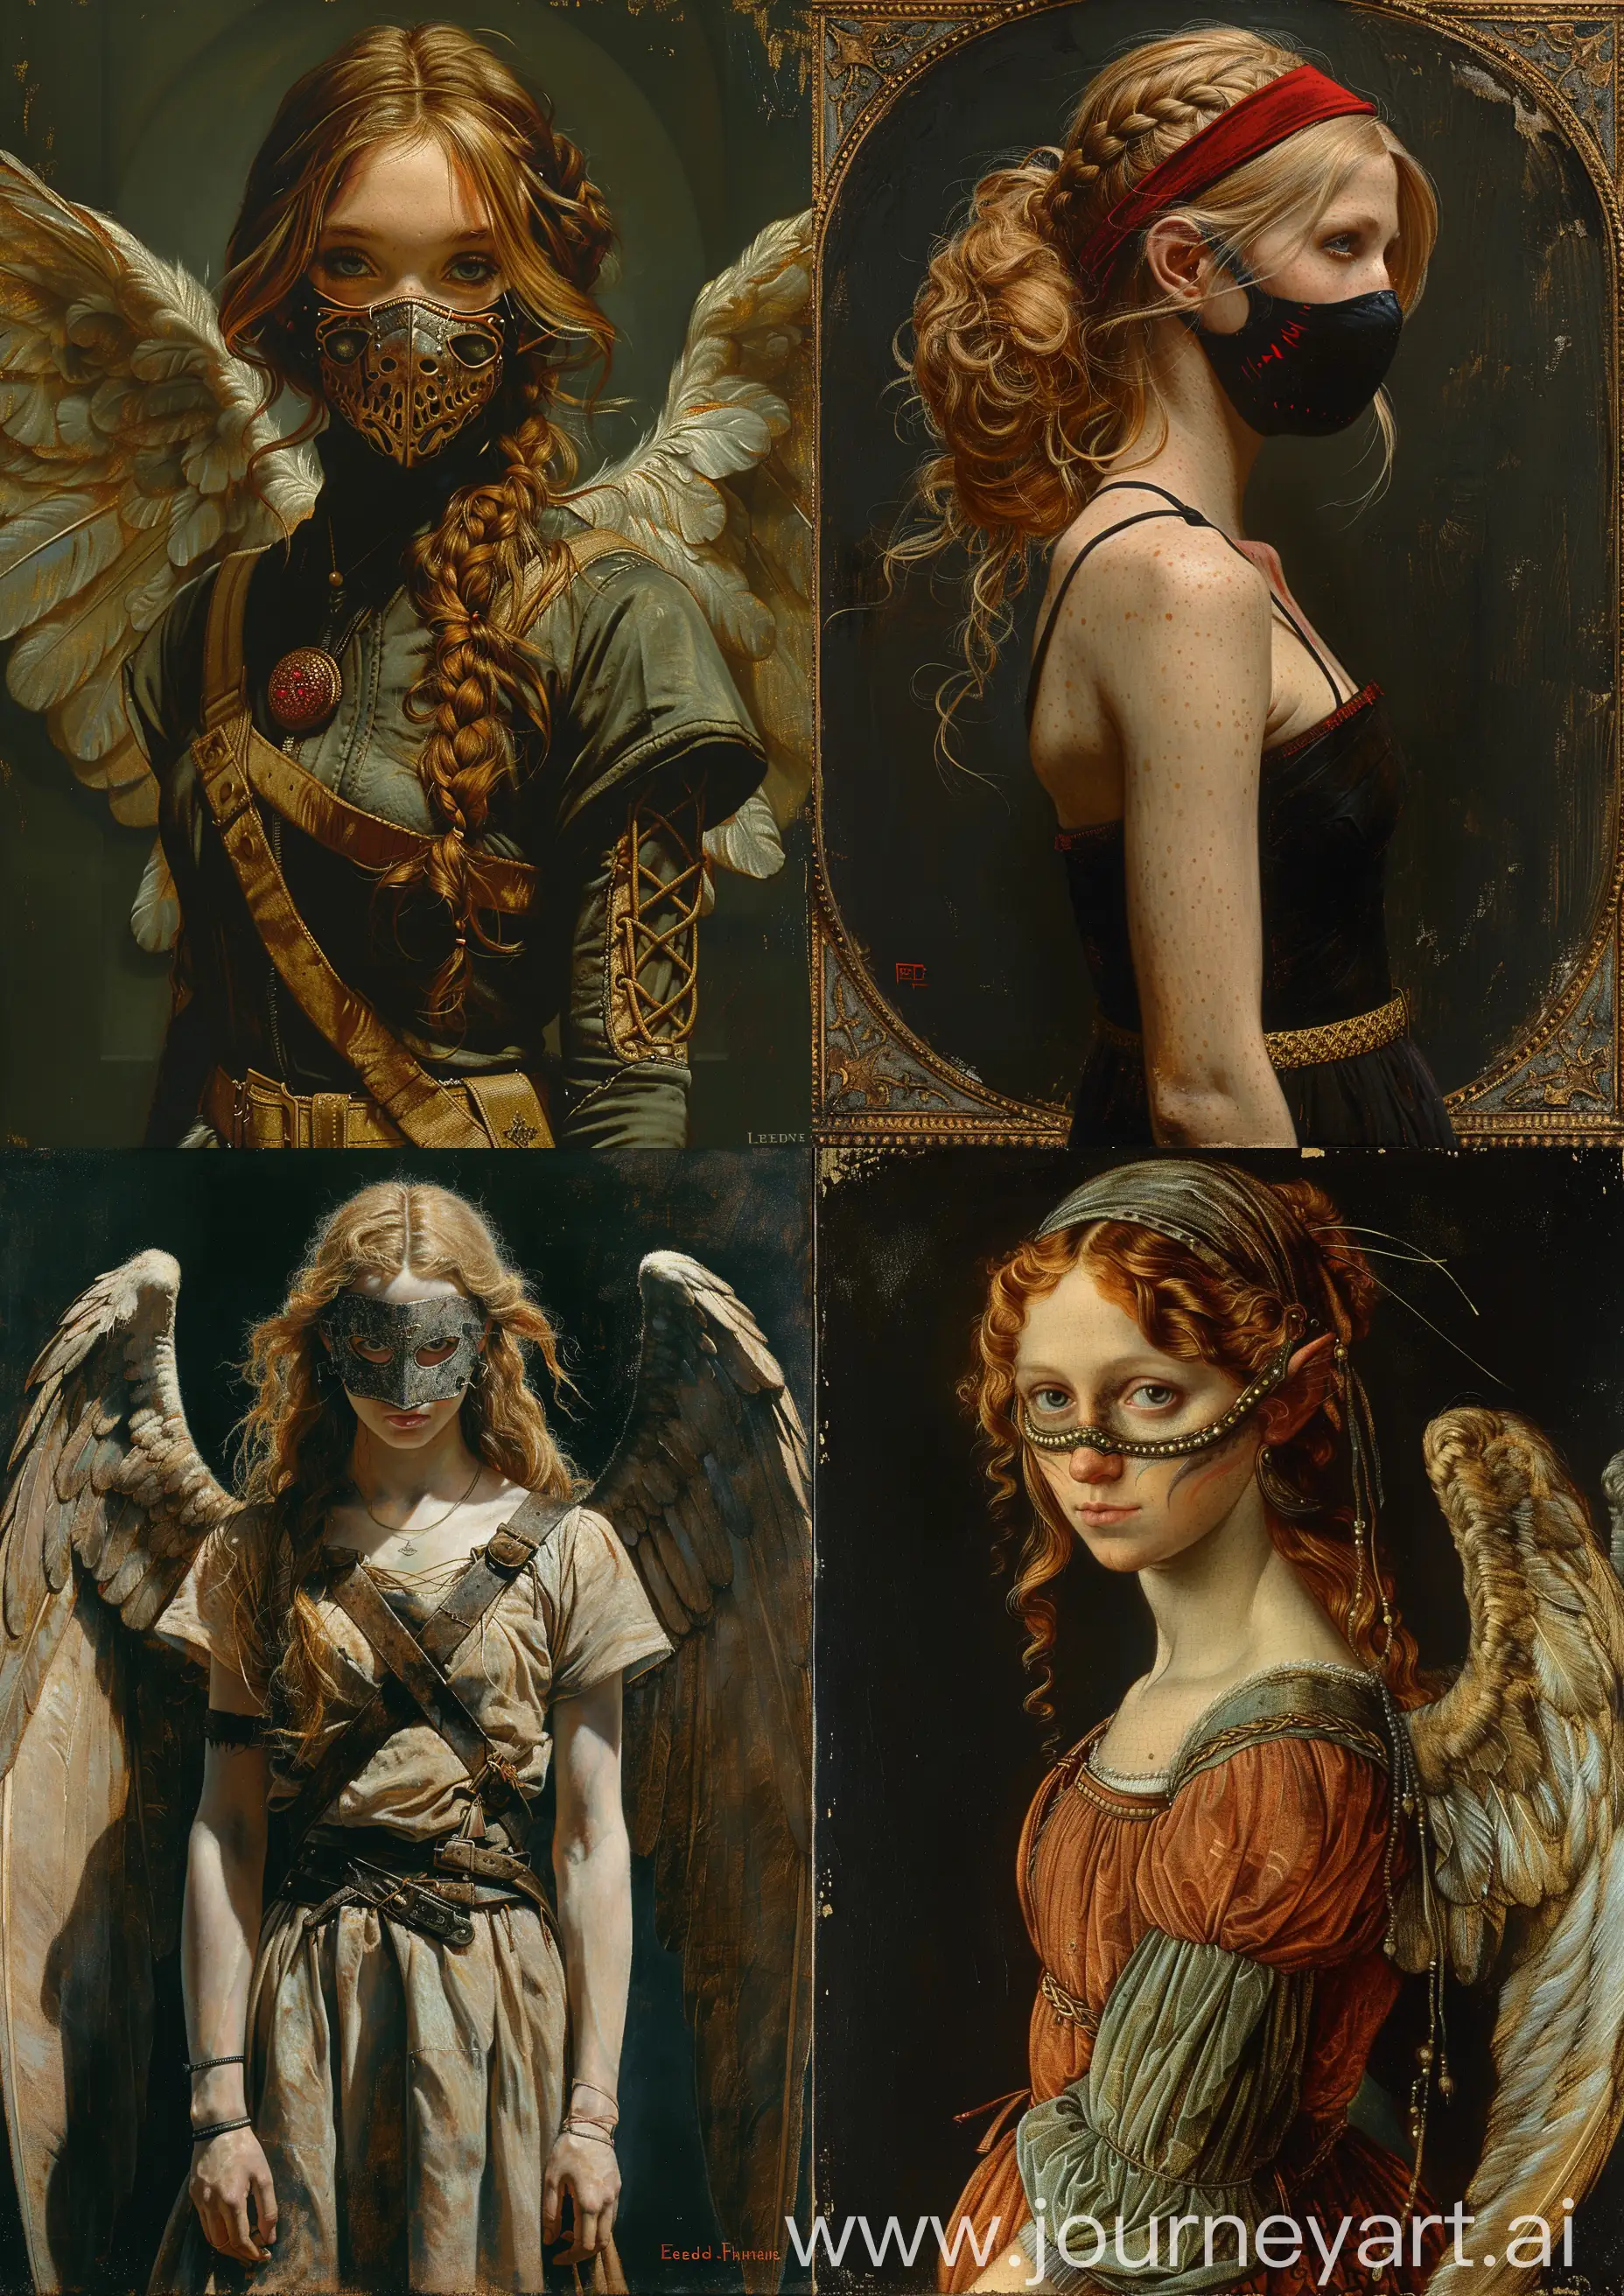 Detailed-Portrait-of-Female-Angel-Warrior-in-Earth-Tones-and-Scary-Face-Mask